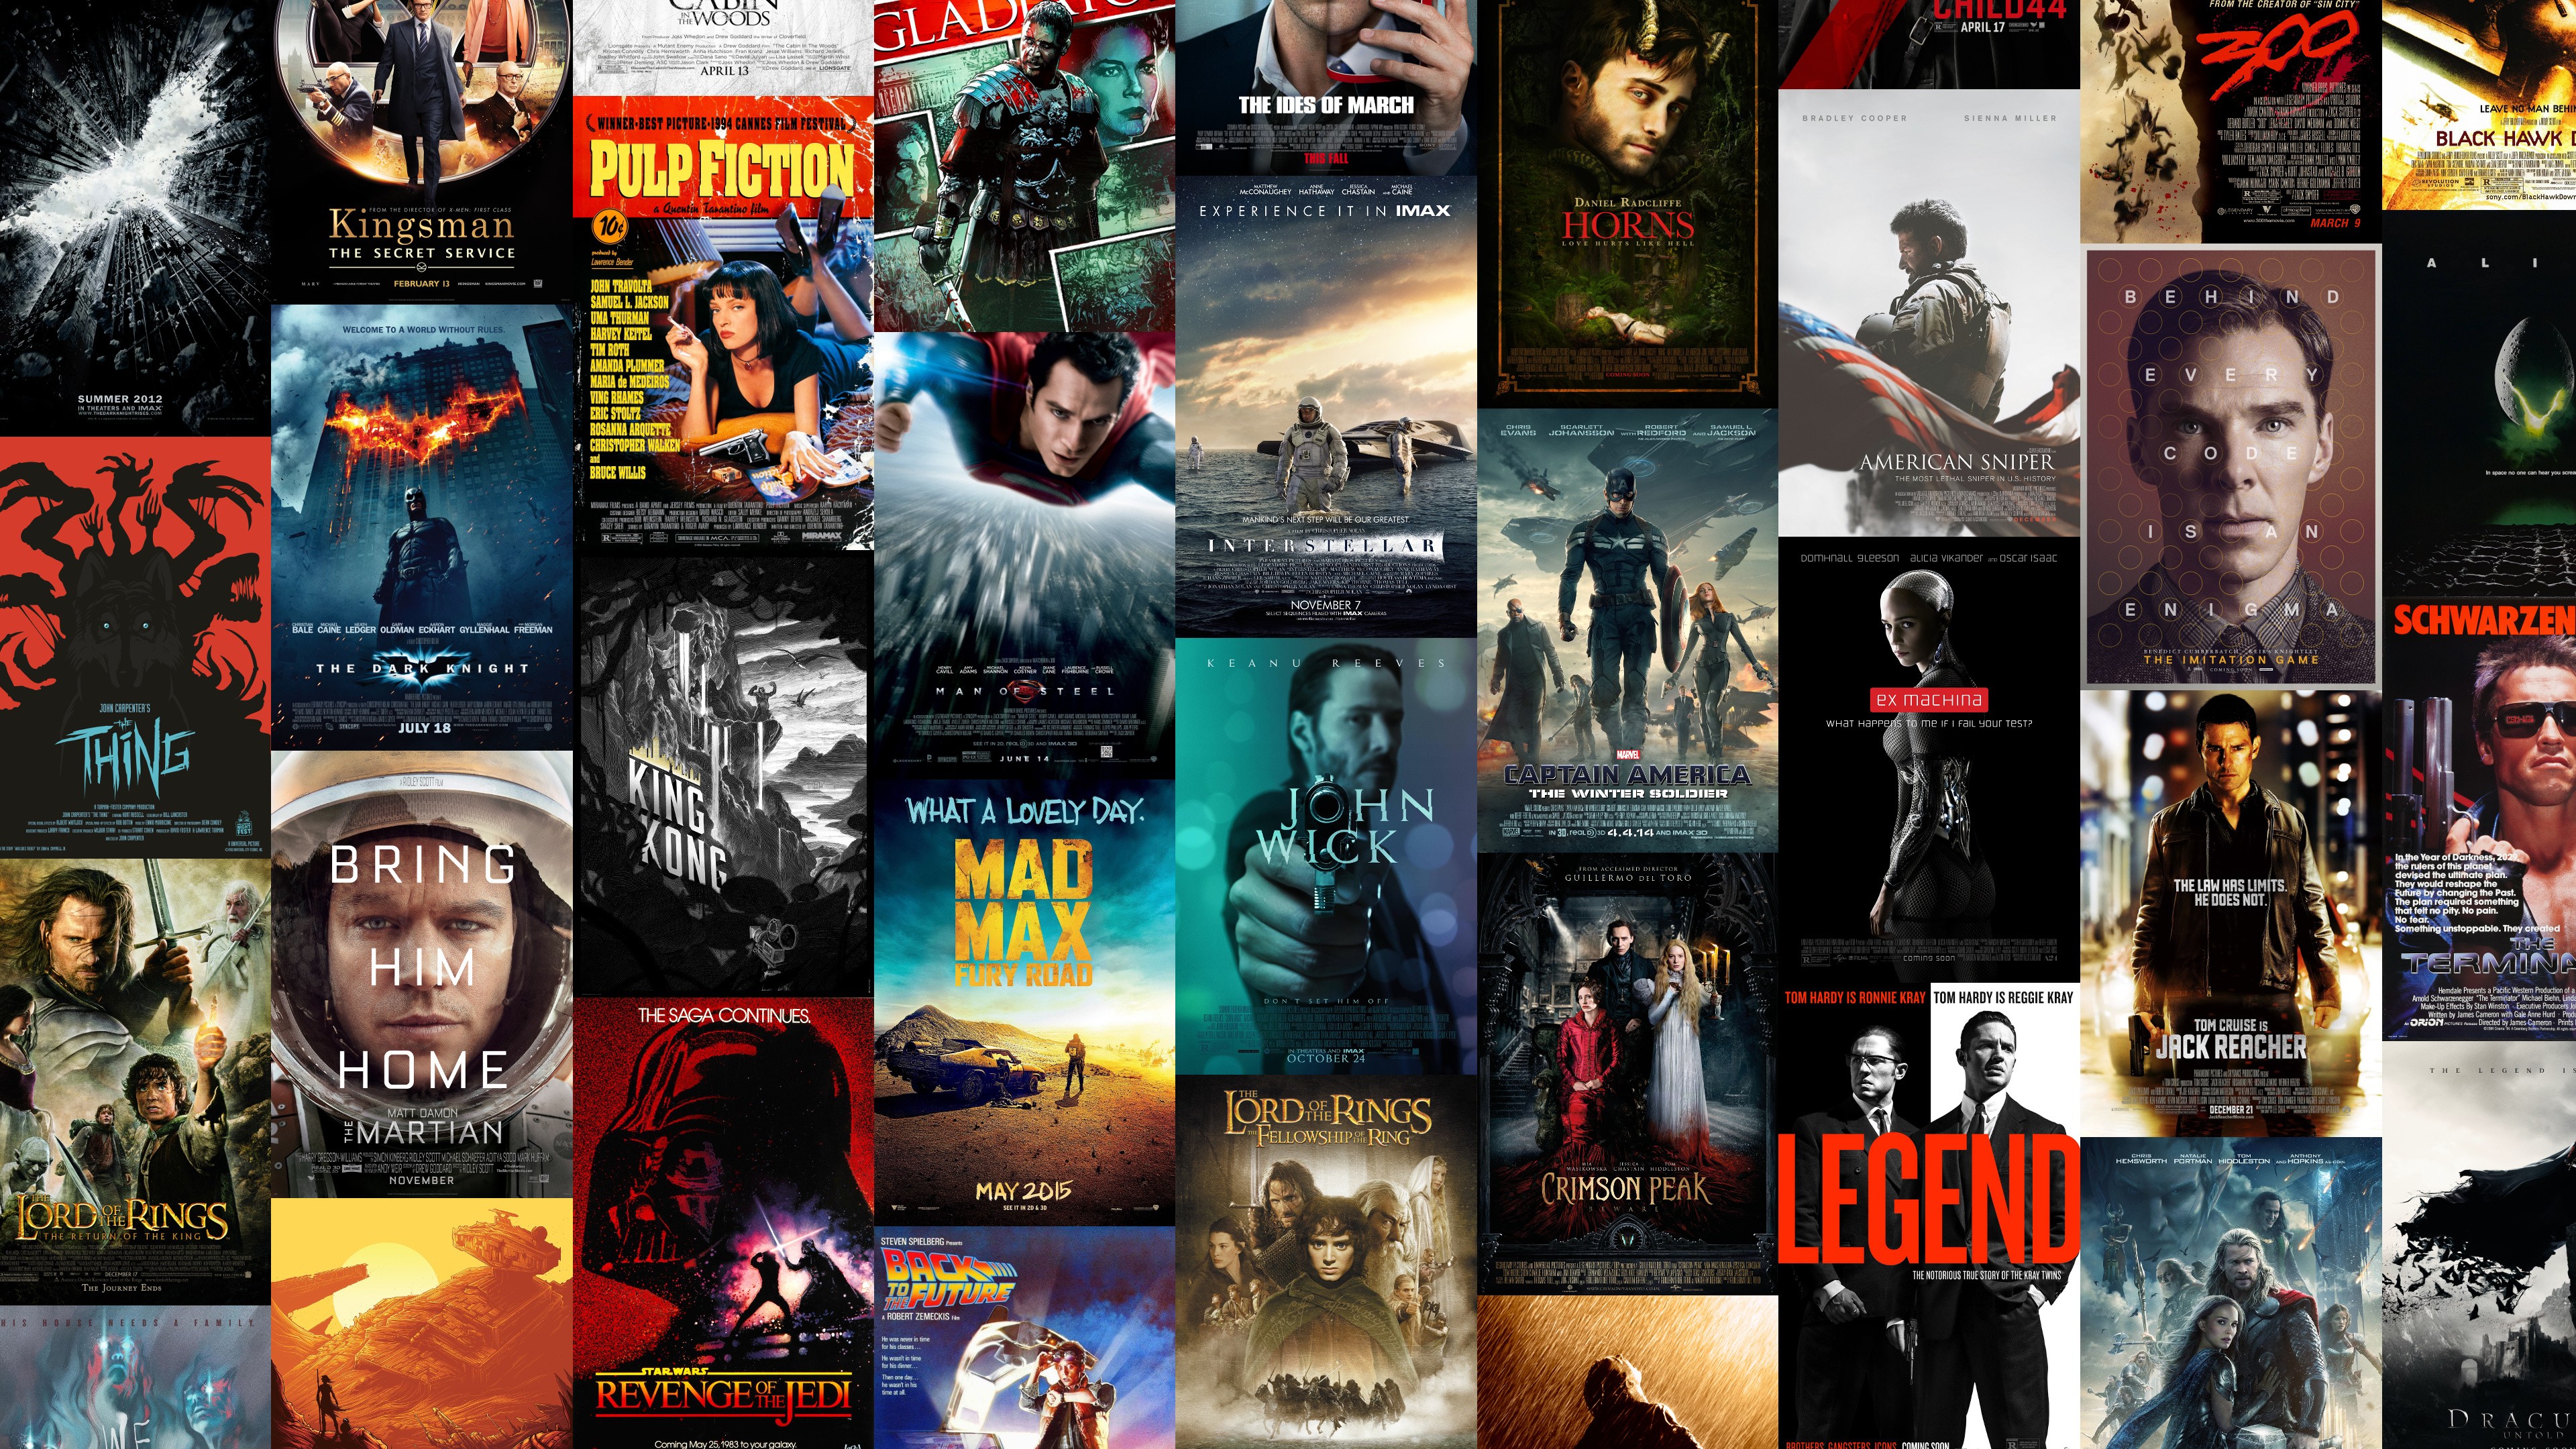 movie poster, collage, movies 3840x2160 Wallpaper wallhaven.cc